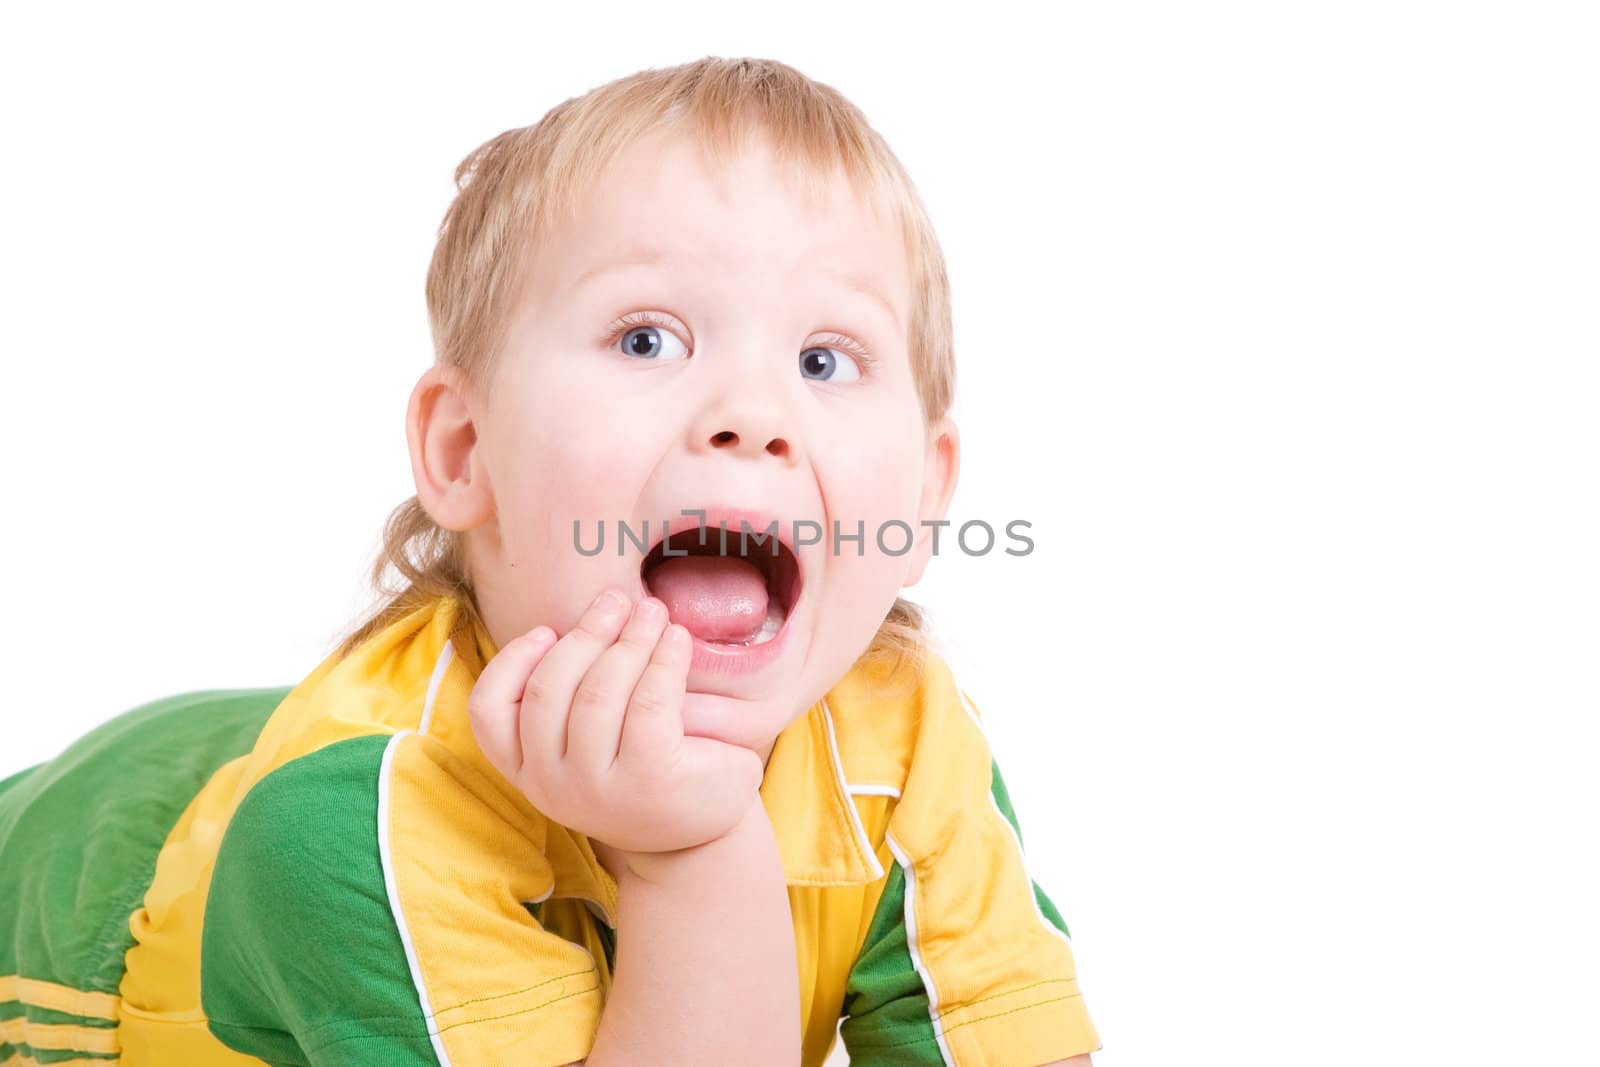 a shouting boy on the floor with the open mouth by vsurkov